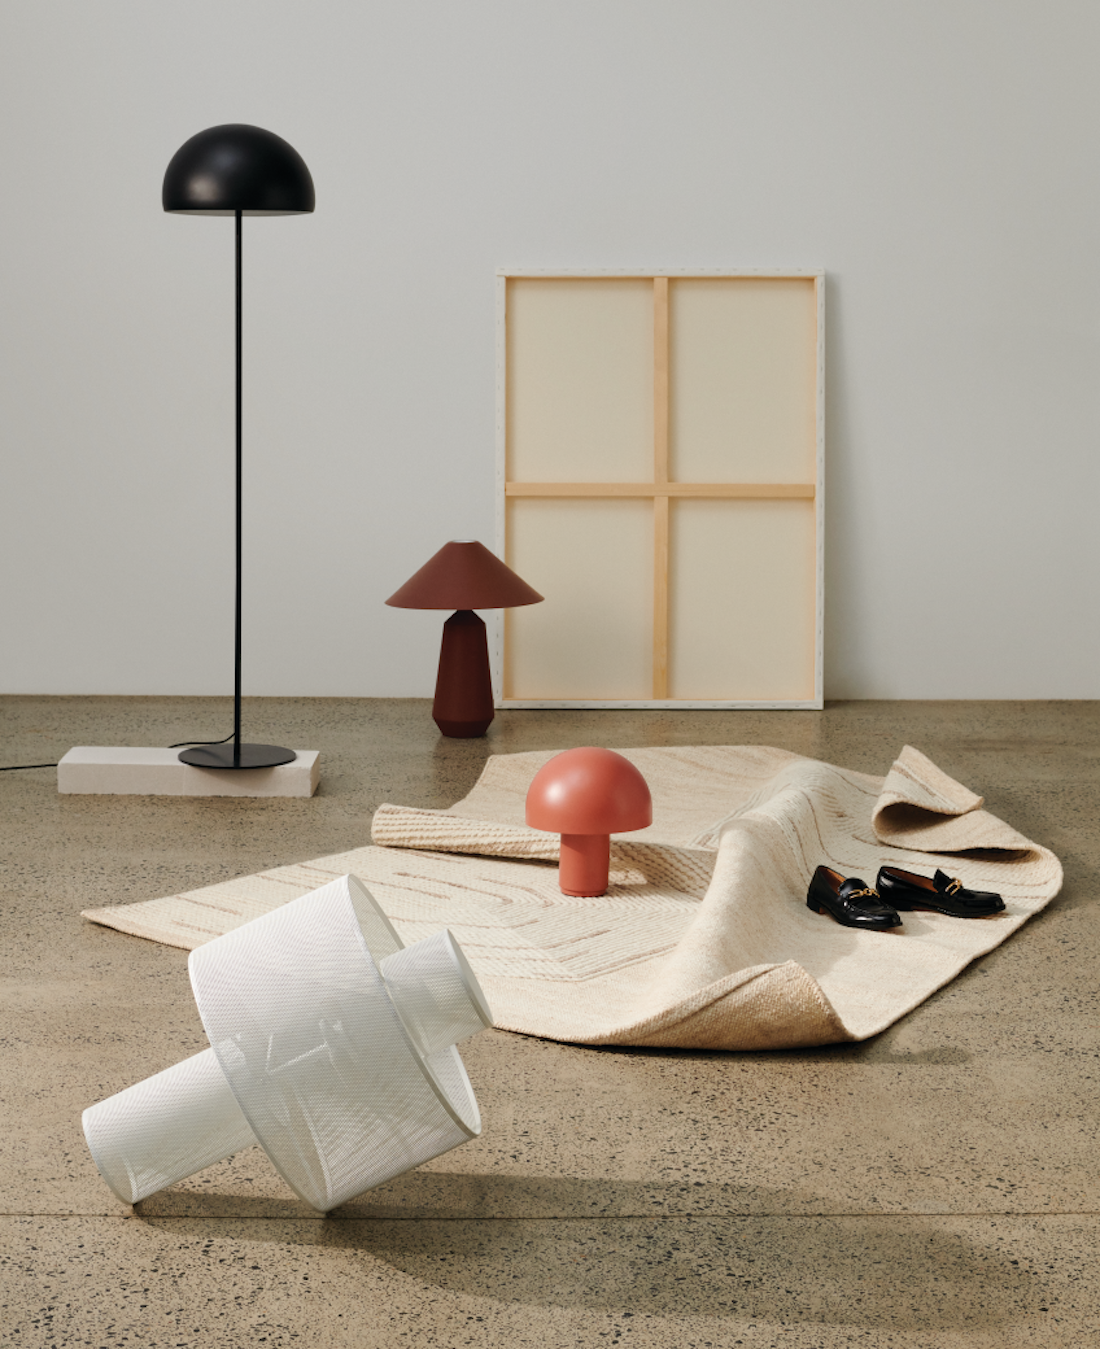 A range of short and tall mushroom lamps sit on a concrete floor.